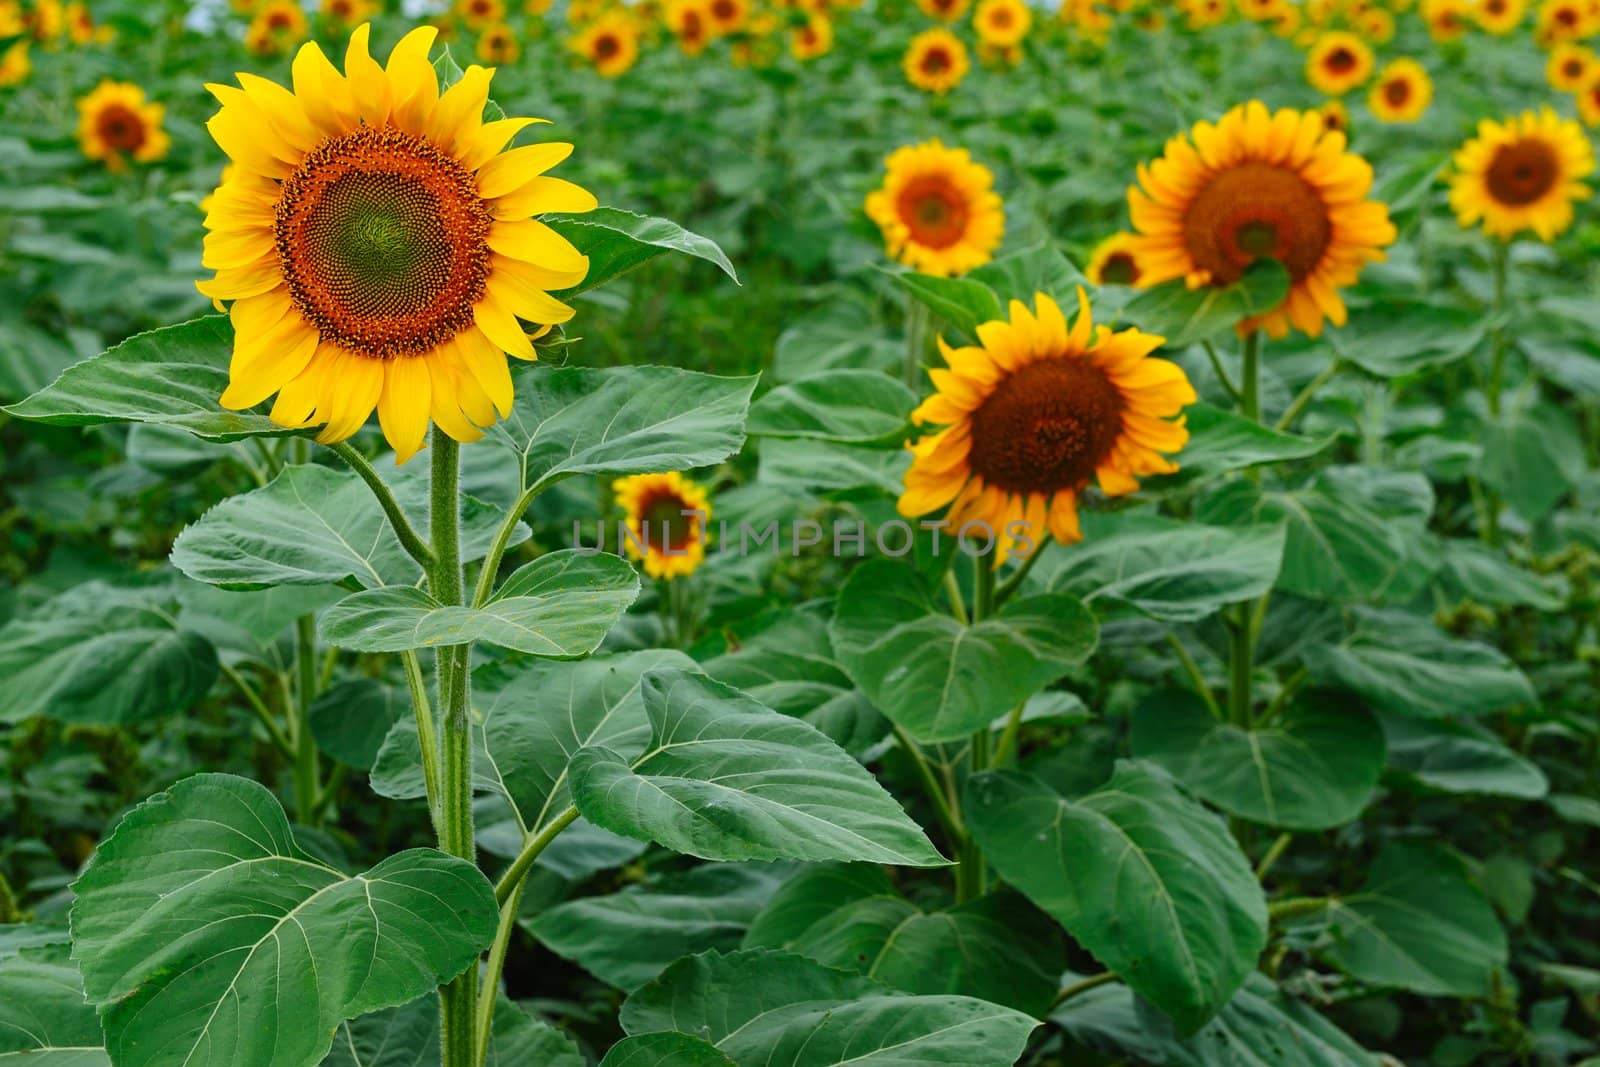 Field of sunflowers by raywoo